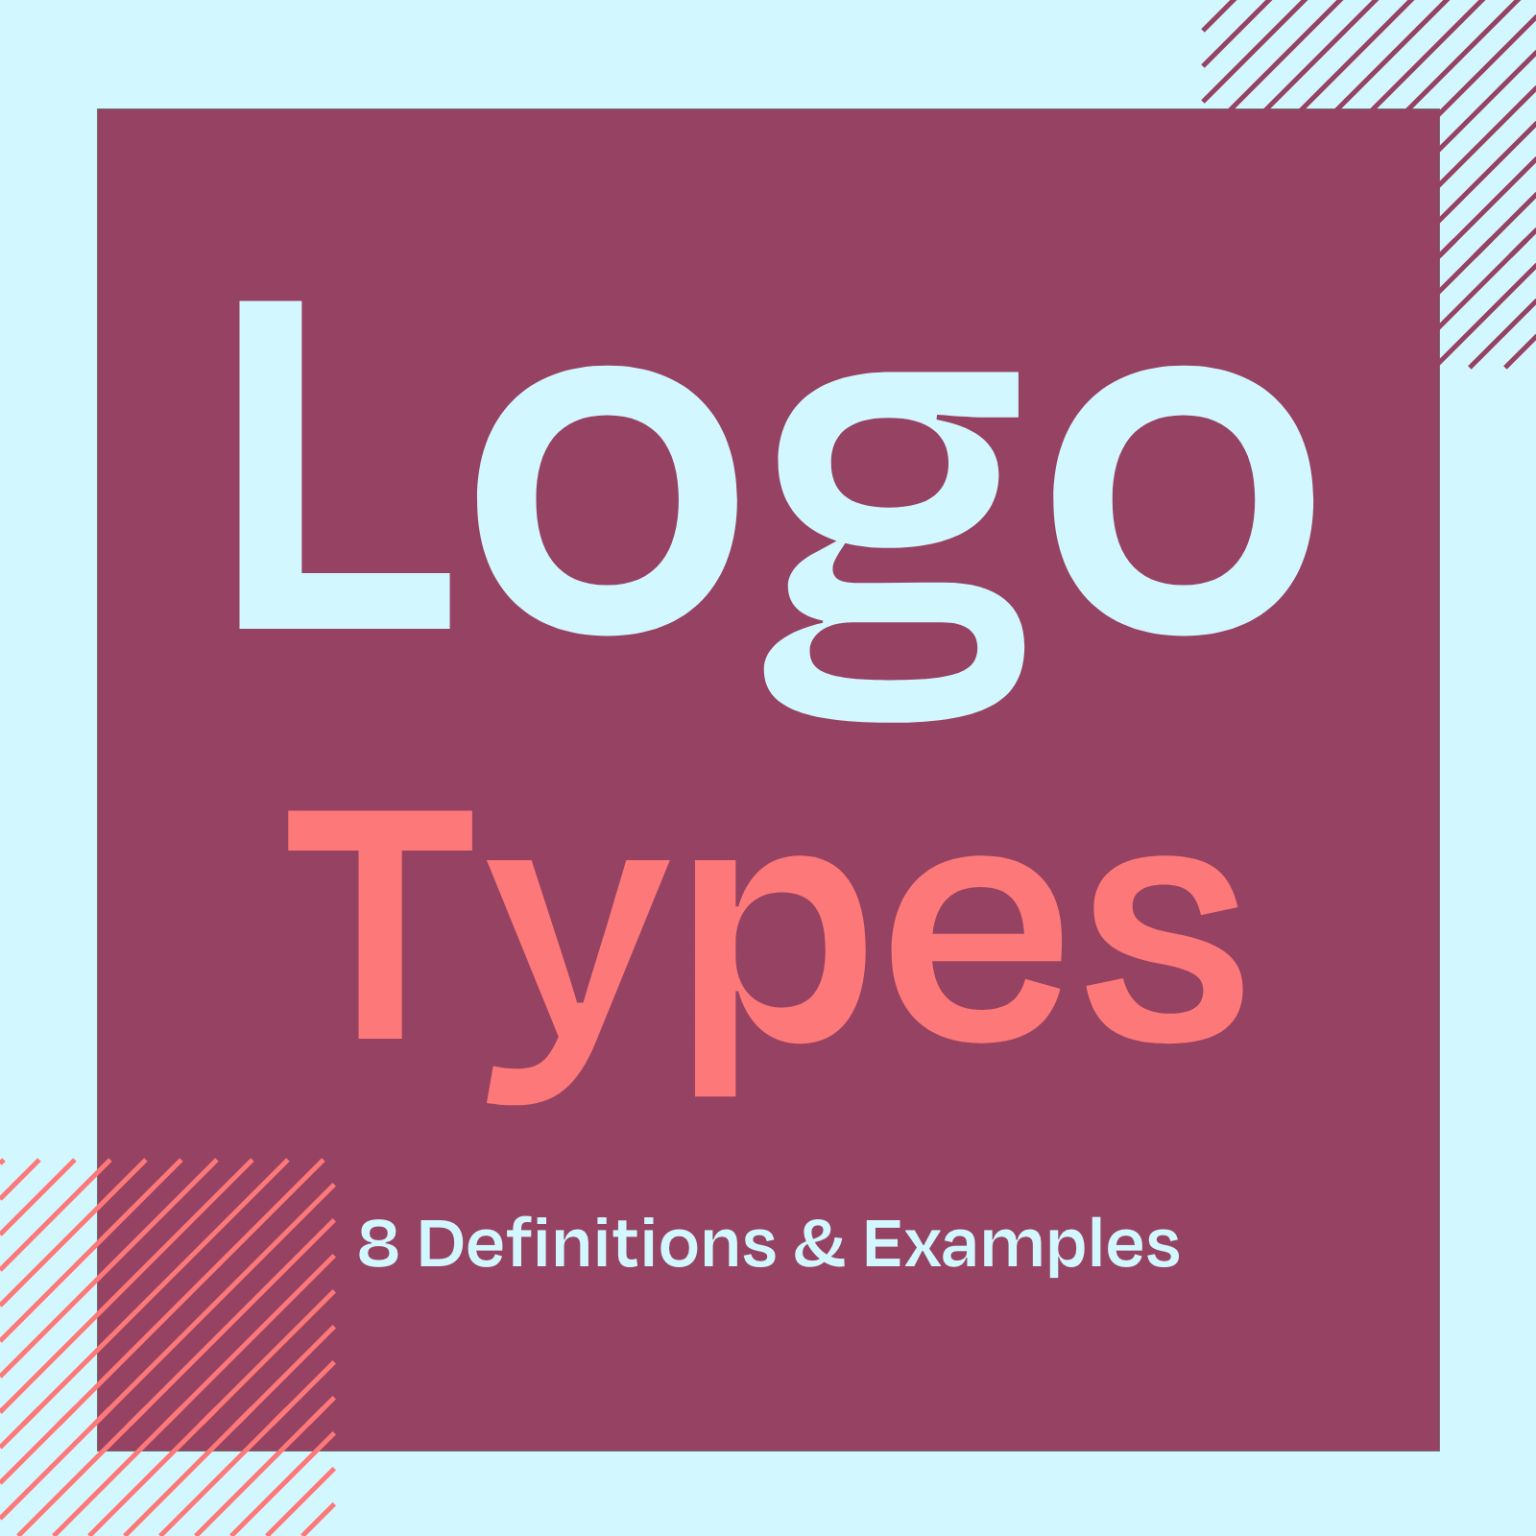 Logo Types - 8 Definitions & Examples